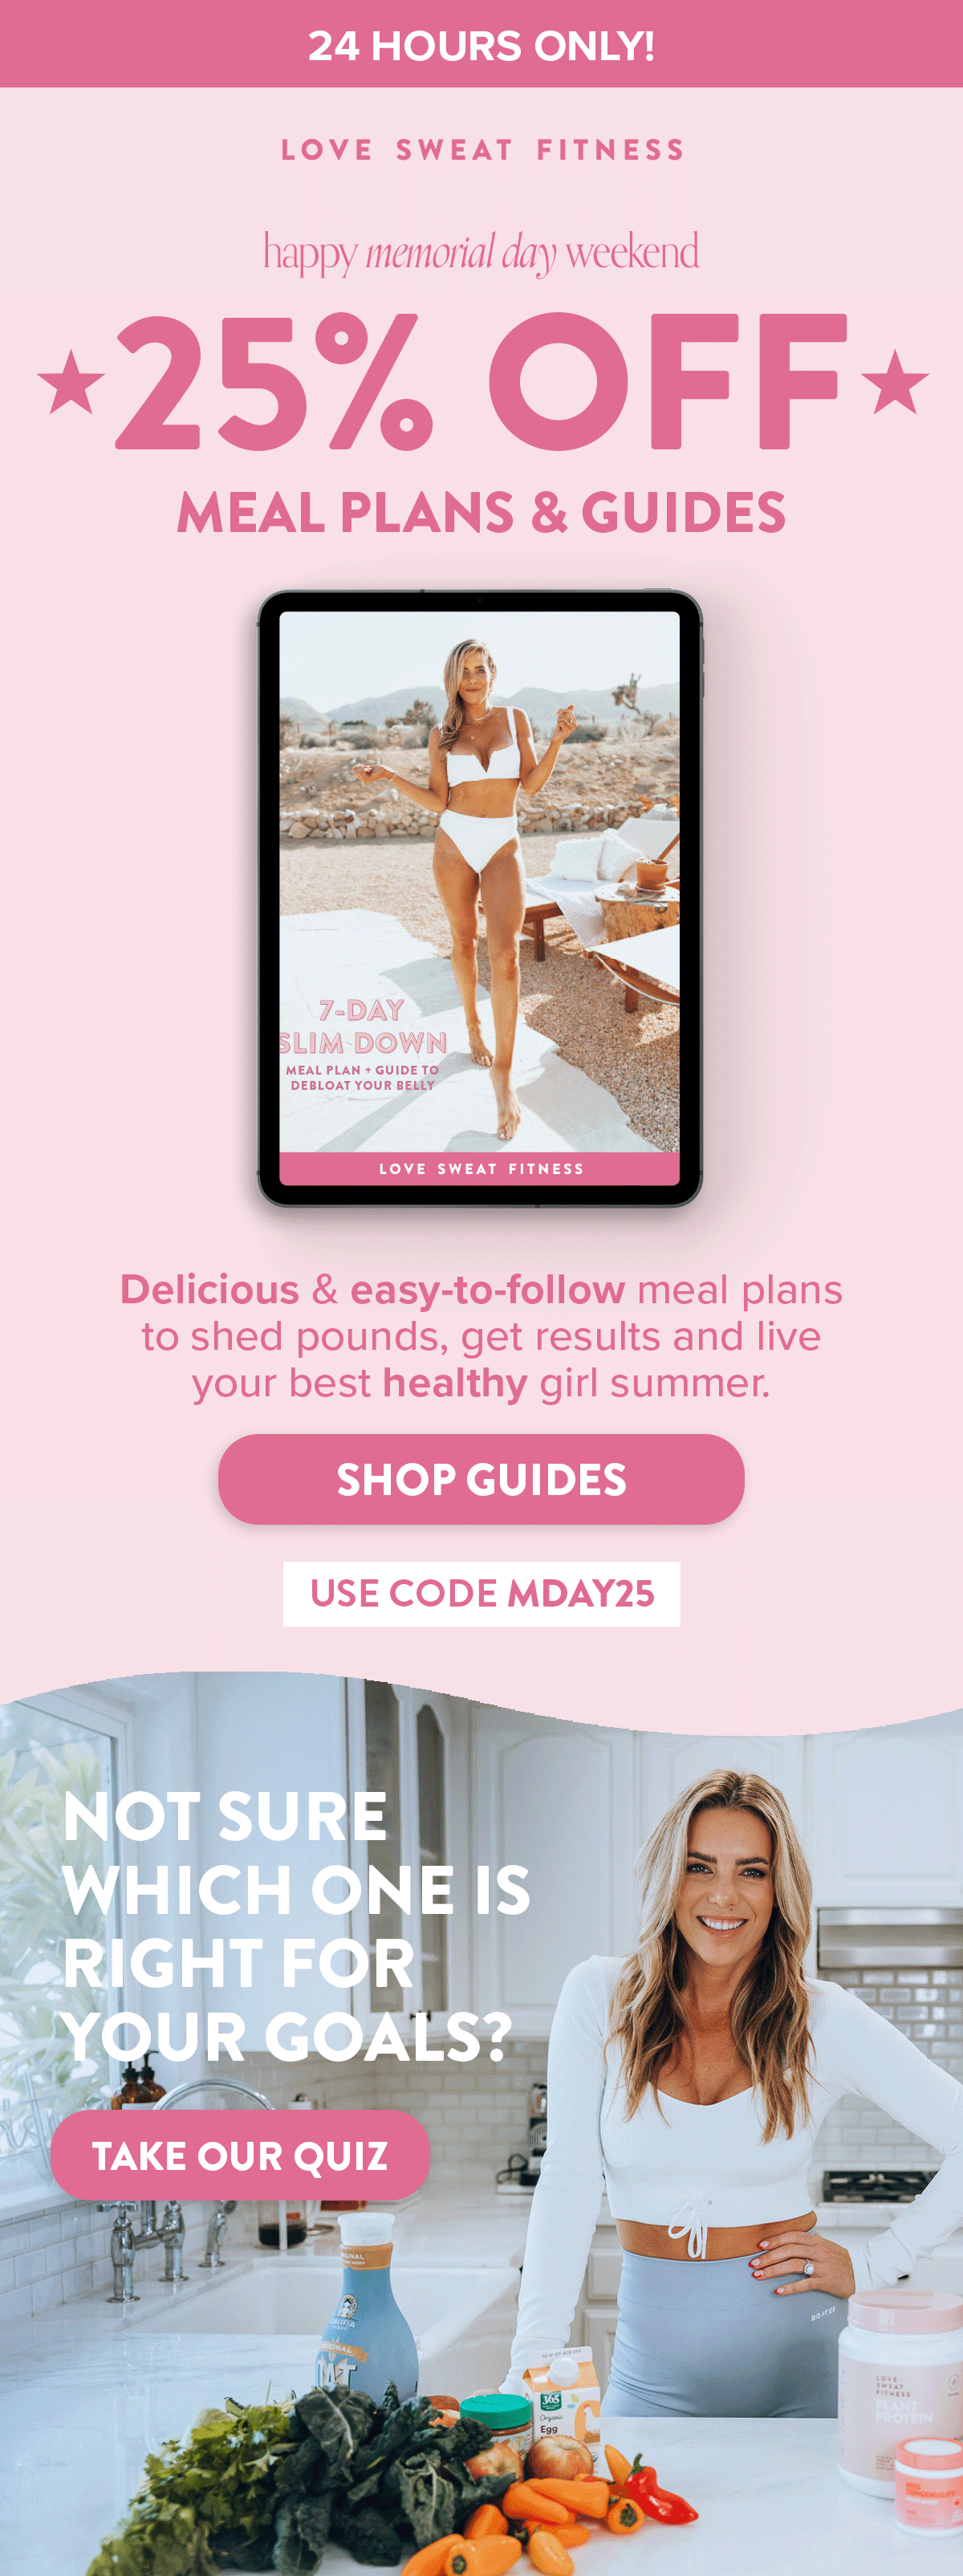 MEAL PLAN SALE+EMAIL_V2 copy 2.gif